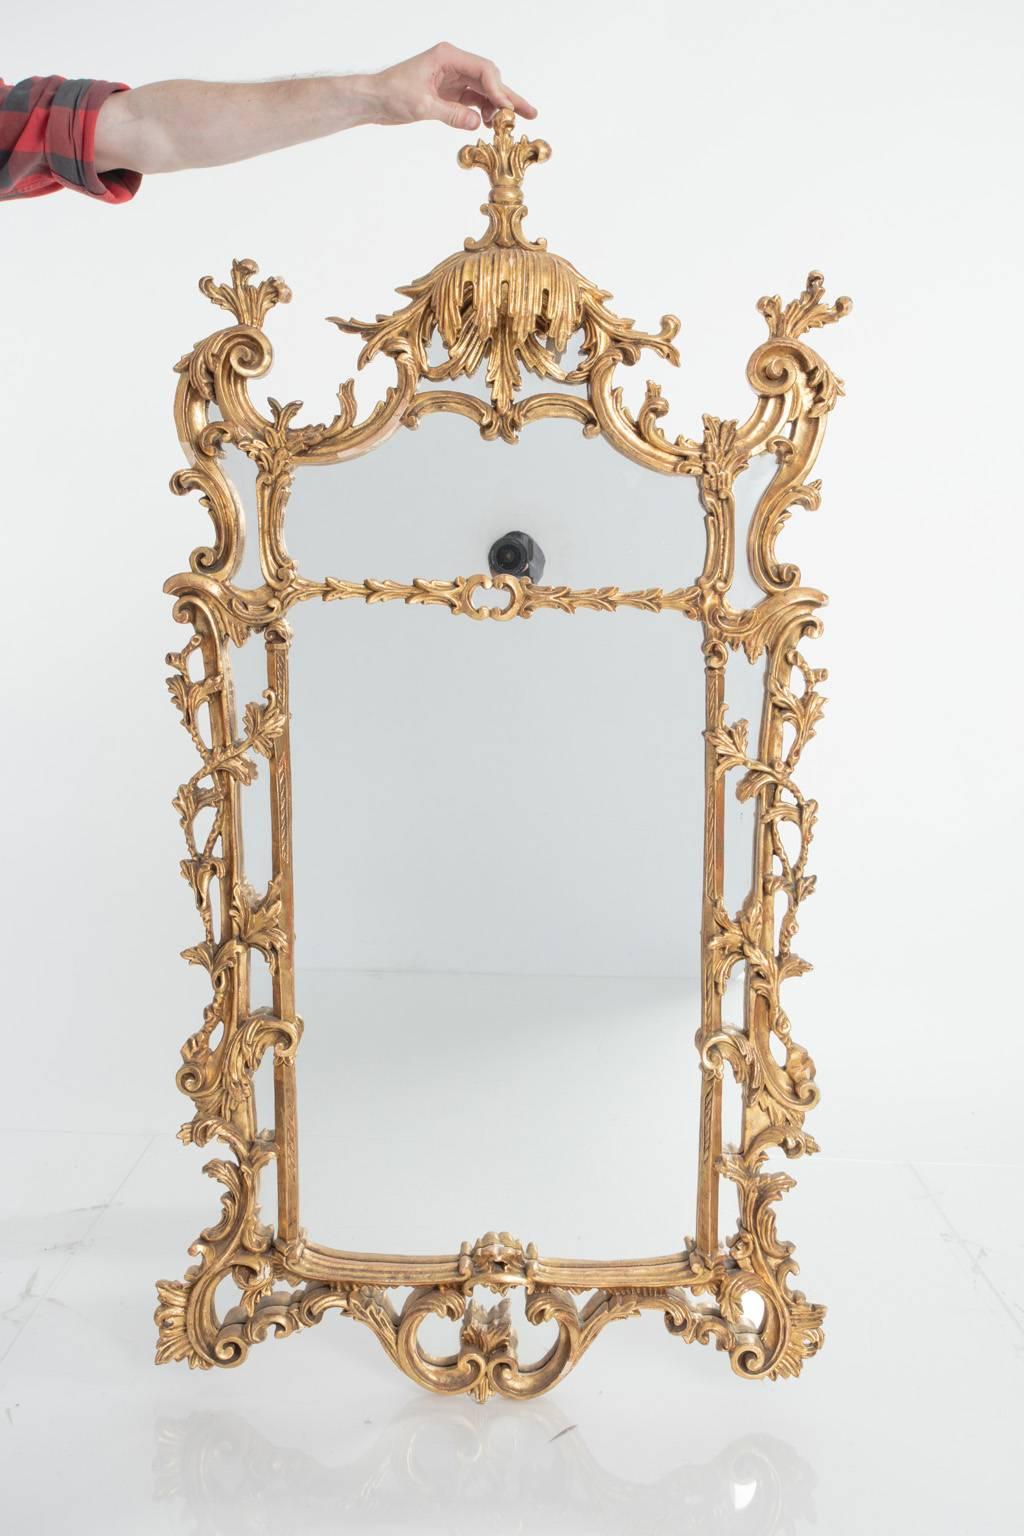 Wonderfully ornate French, gesso and gilt mirror with intricate volute details.